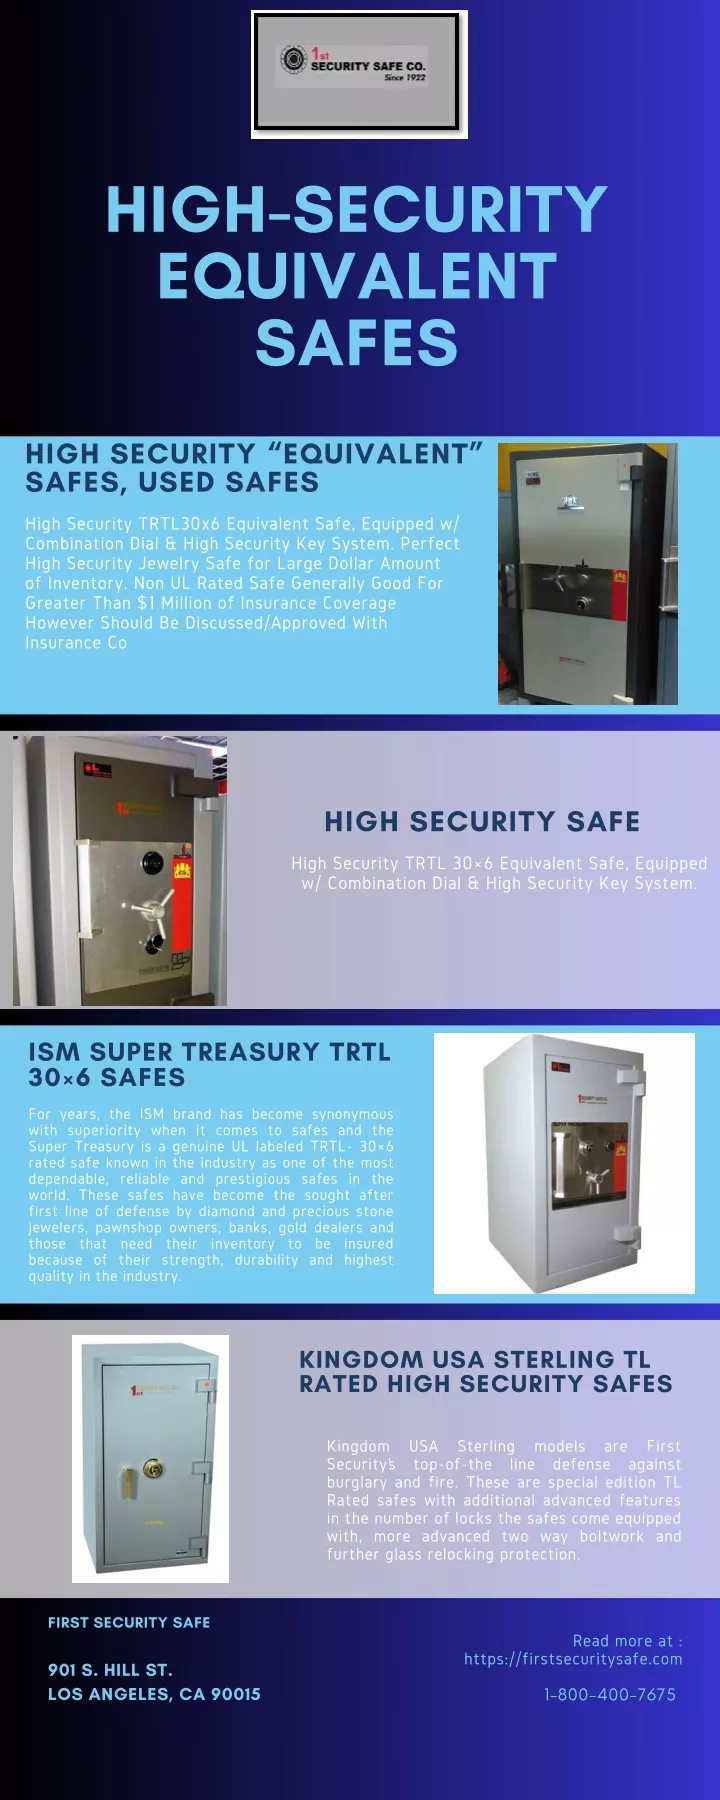 high security equivalent safes